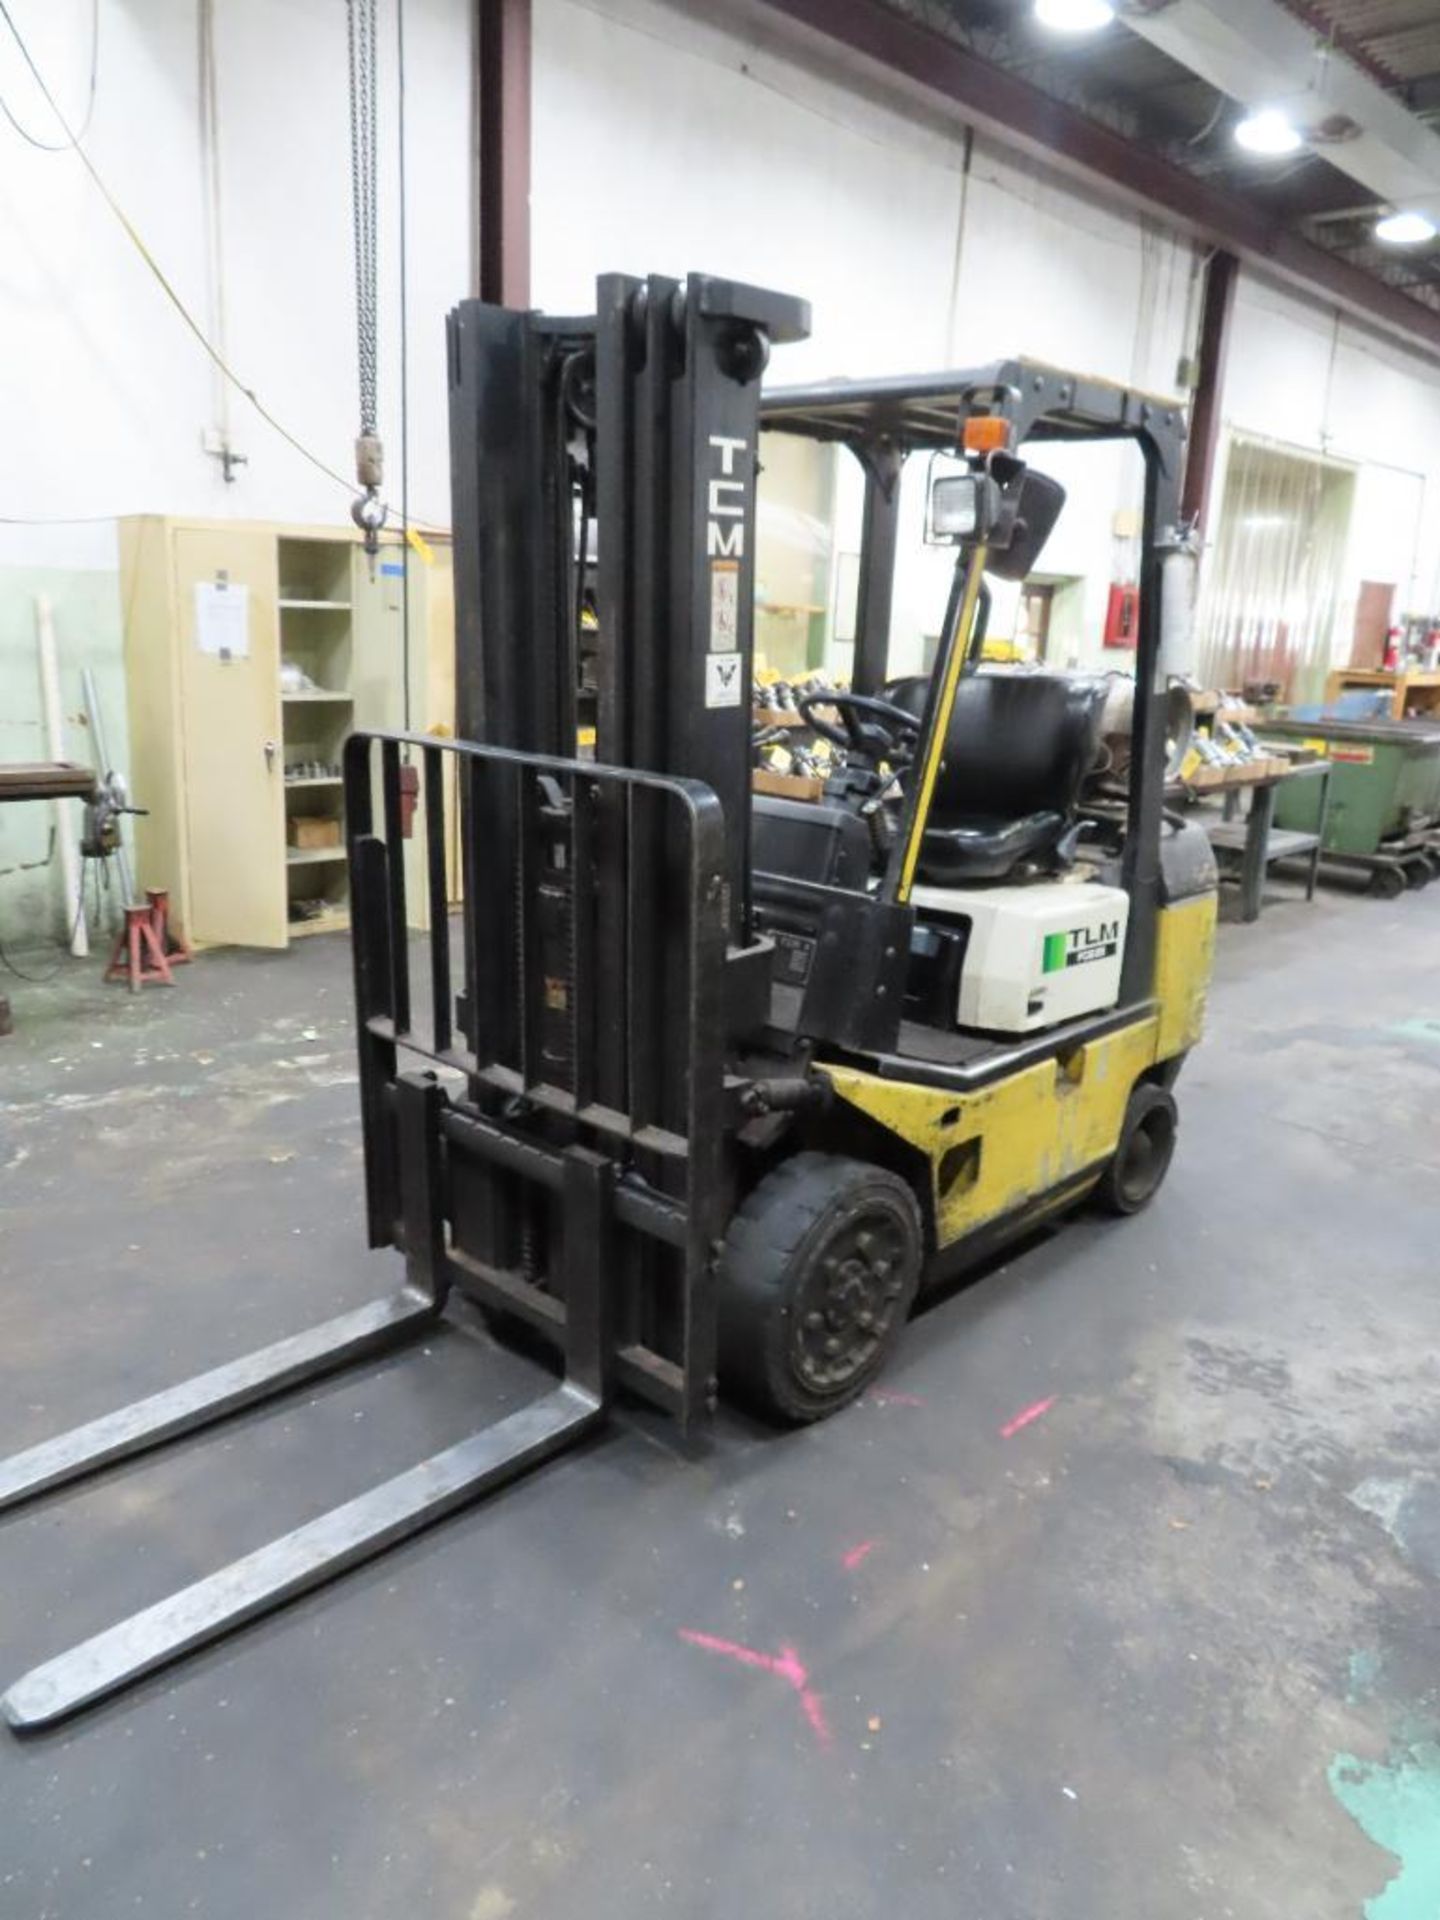 TCM FCG25T7T, 4600#LPG Powered Forklift, Solid Tires, 3-Stage Mast 189" Reach, 42" Forks, S/N:A15G03 - Image 2 of 6